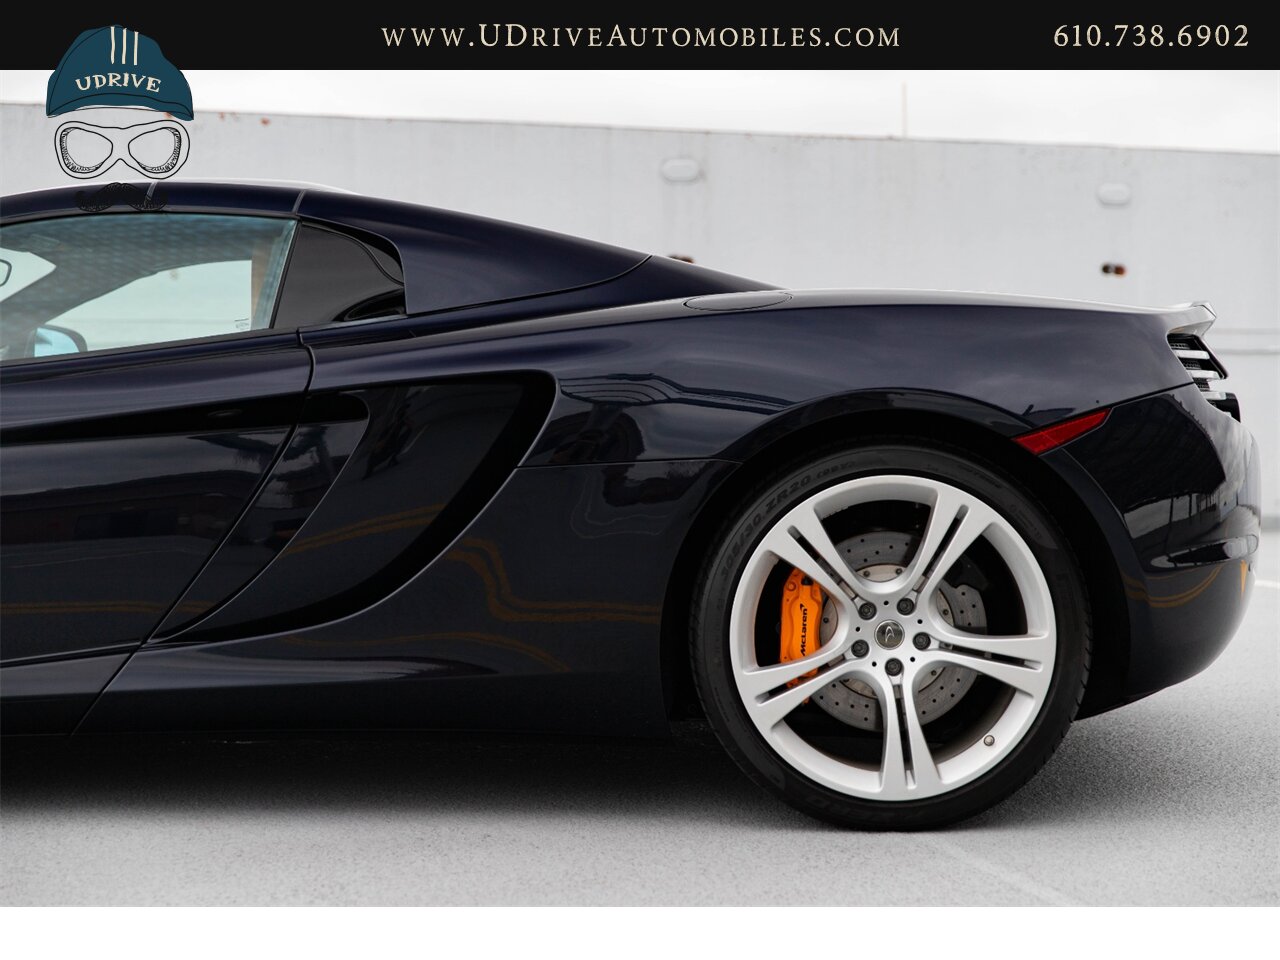 2013 McLaren MP4-12C Spider 1 Owner 6k Miles Carbon Fiber Full Leather  Sapphire Black over Natural Tan Leather - Photo 25 - West Chester, PA 19382